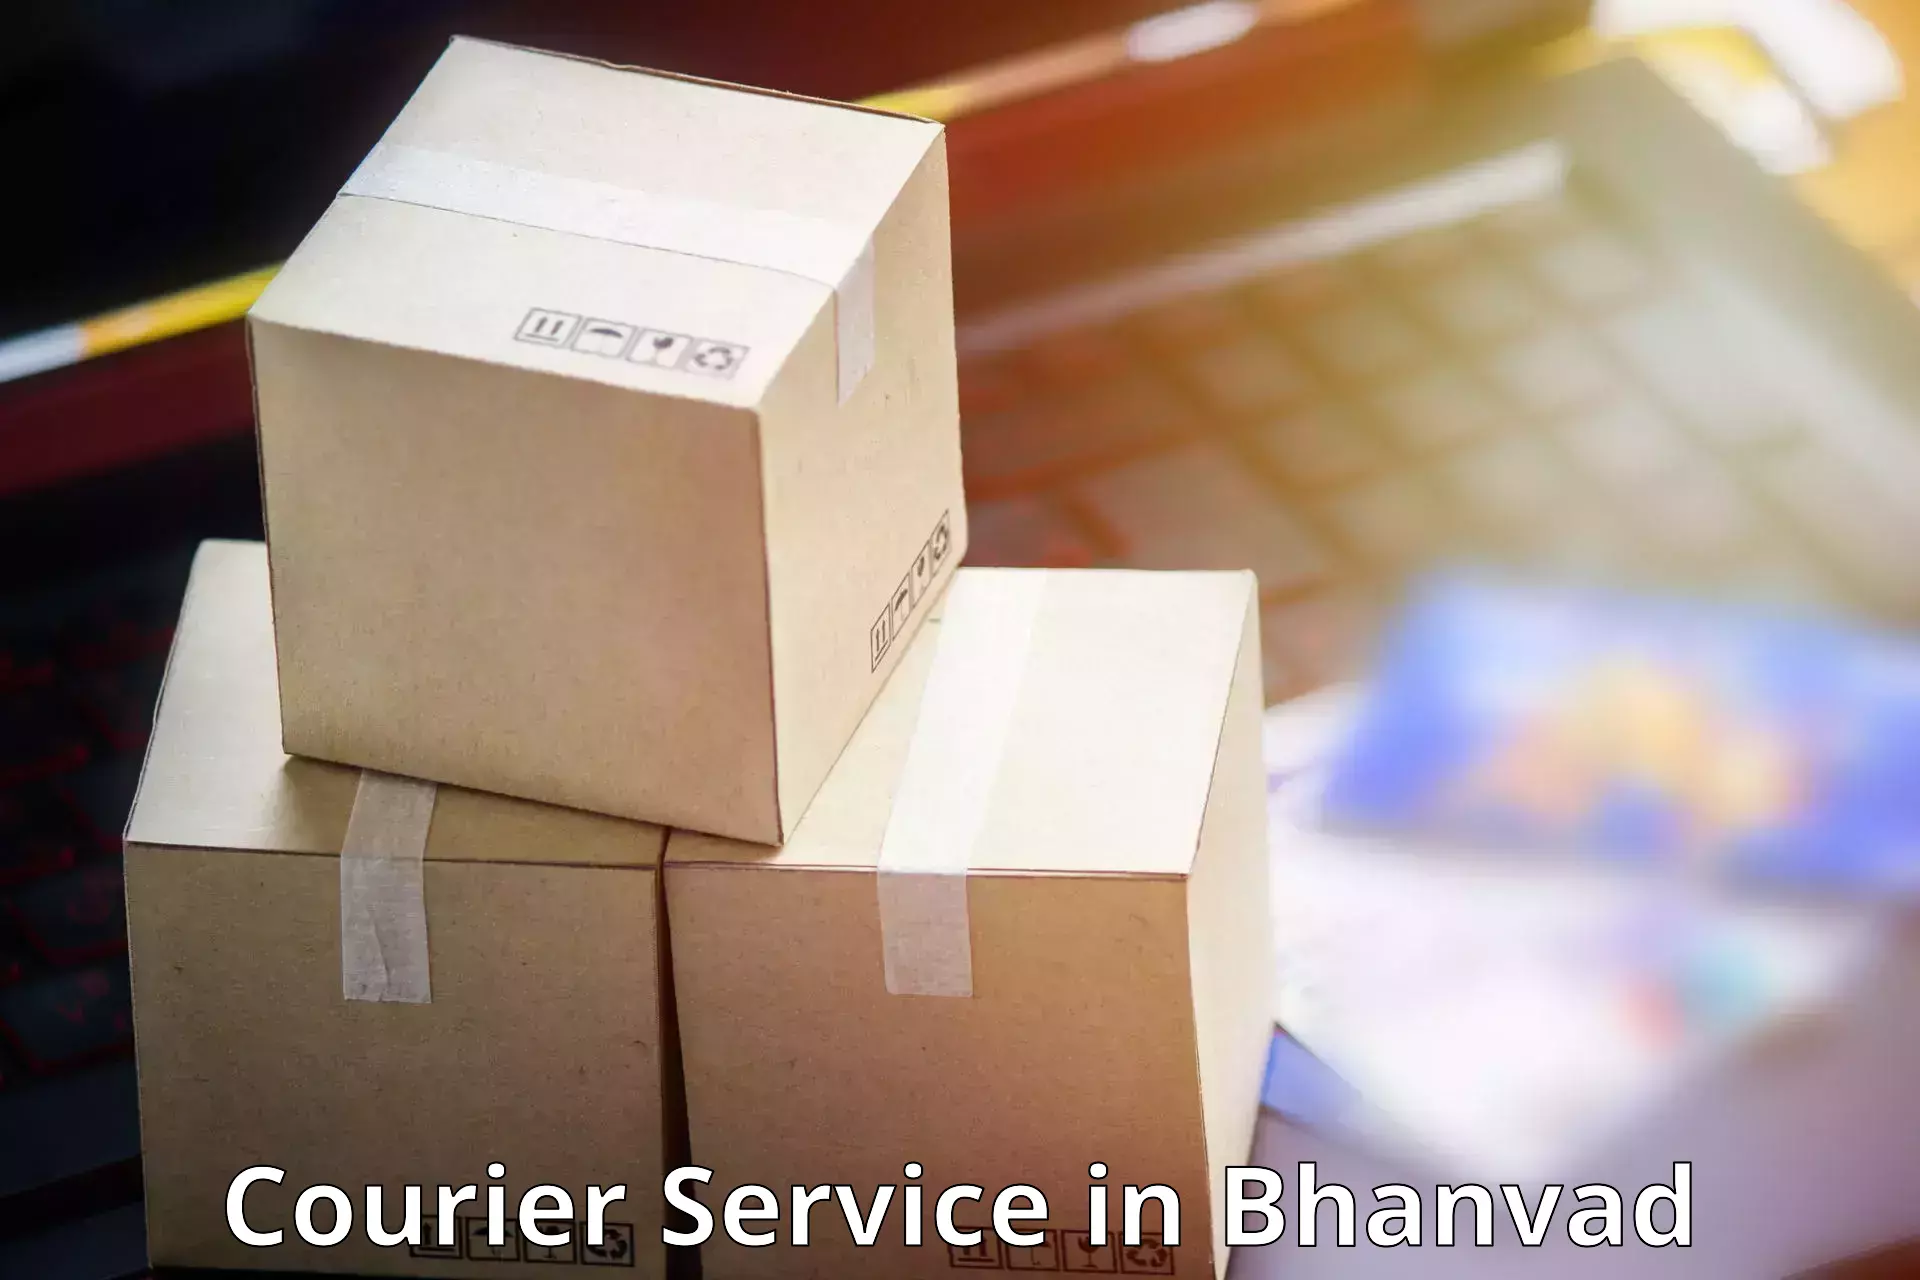 Rapid freight solutions in Bhanvad